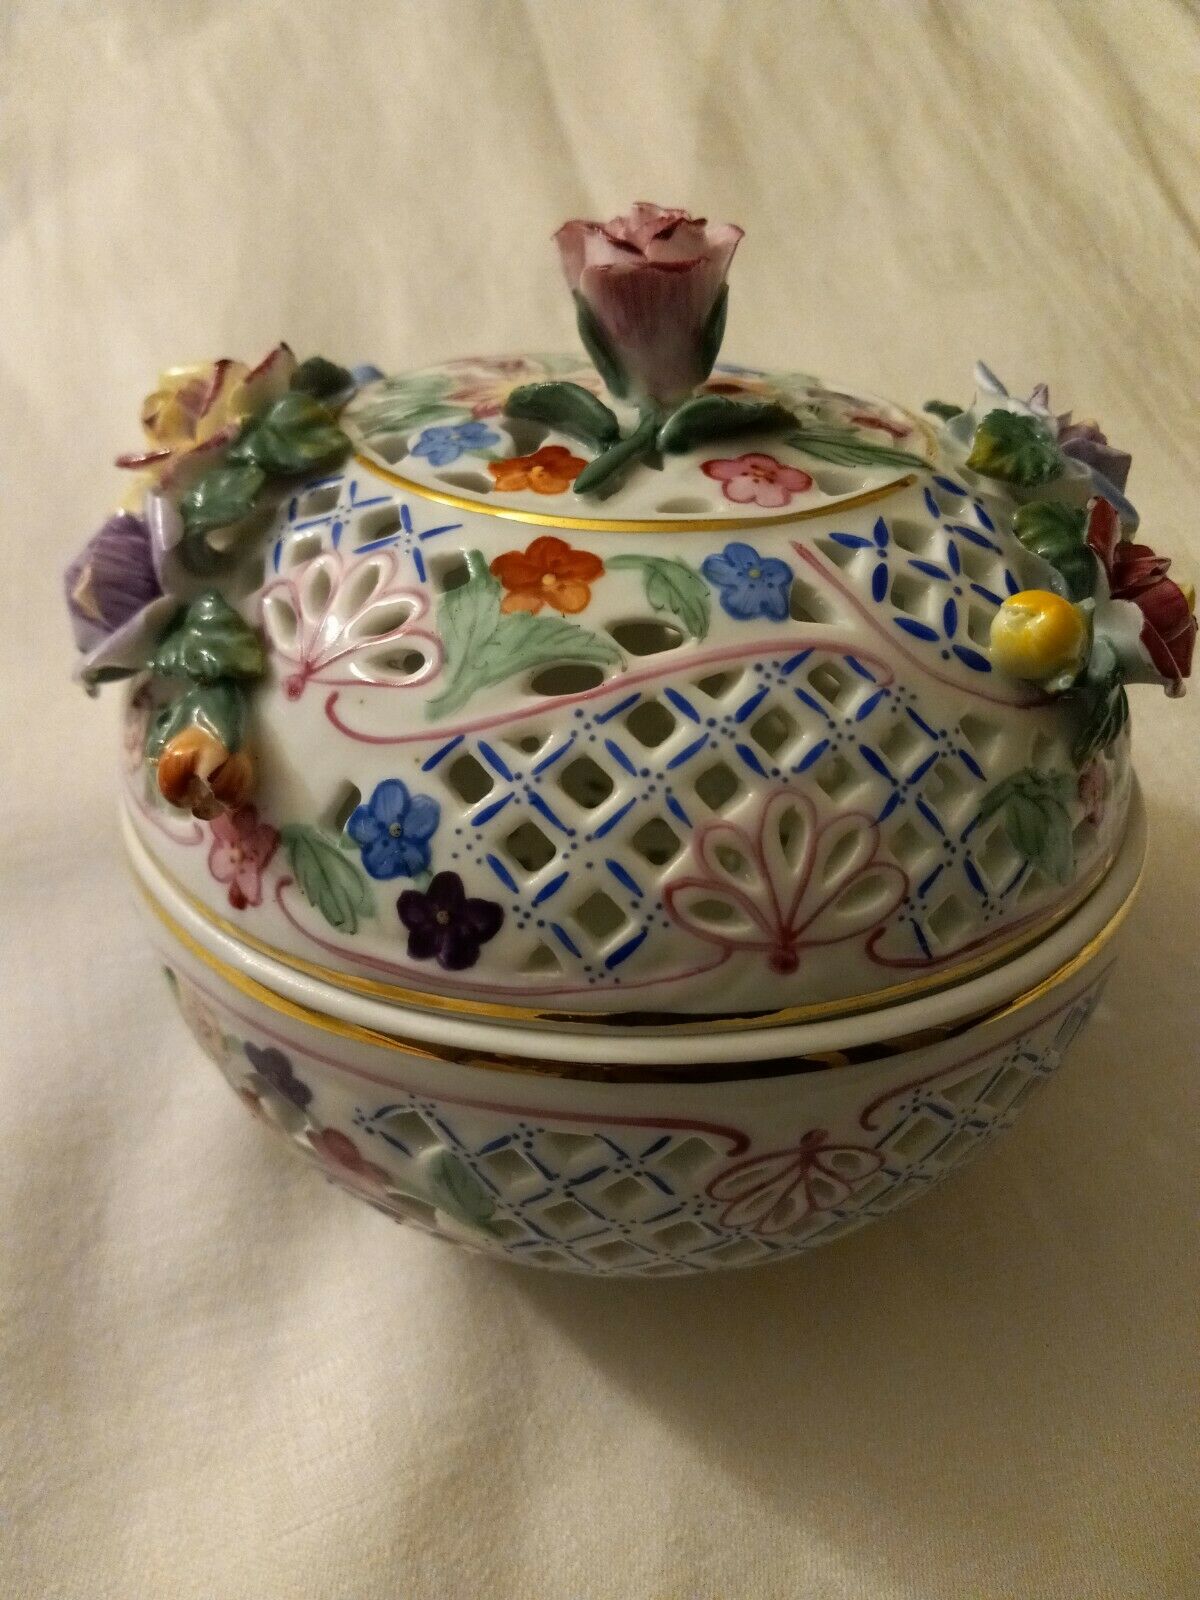 Rare Beautiful Pierced Bowl & Cover Adorned With Handcrafted Flowers, China Made